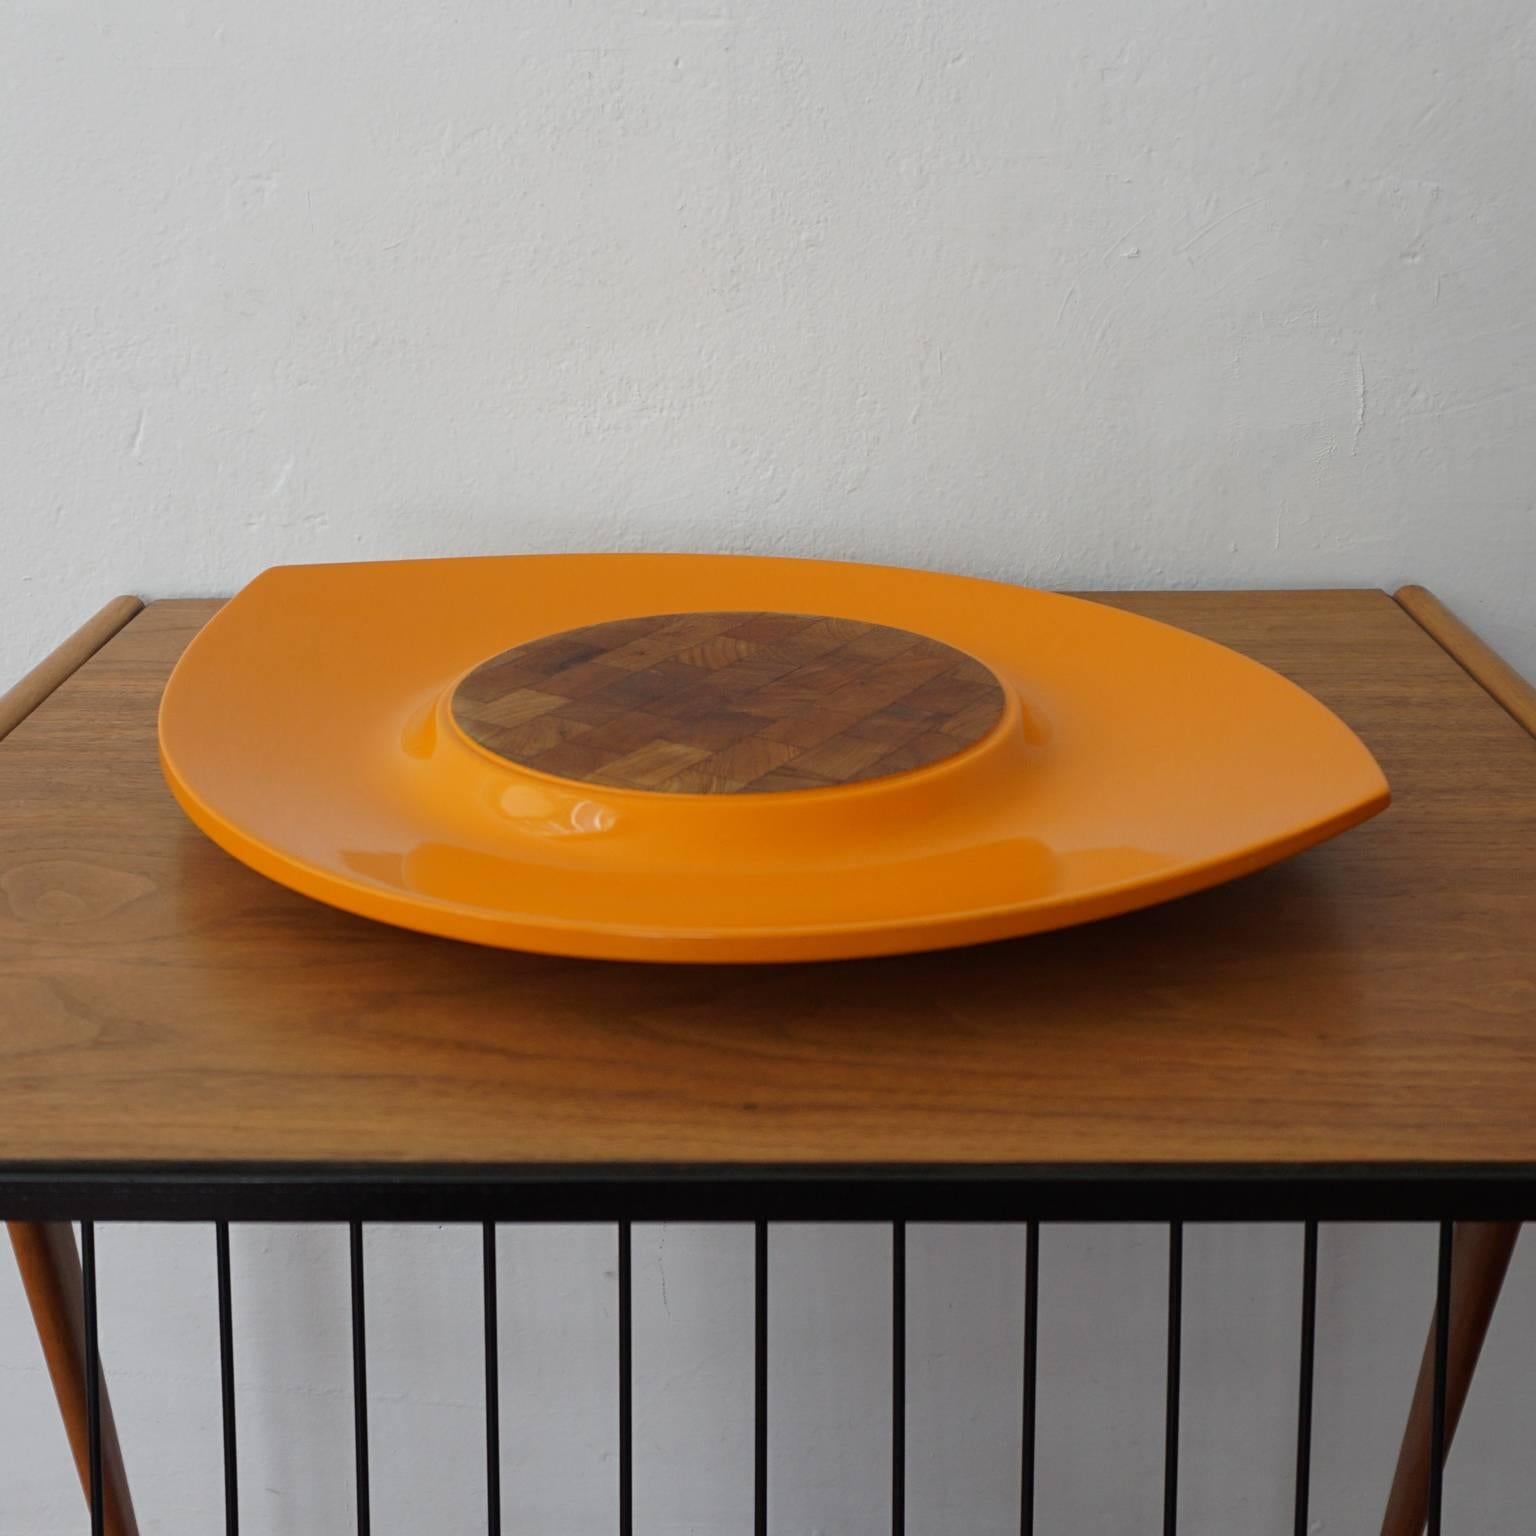 Jens Quistgaard for Dansk Festival orange lacquer over wood serving tray. Made in Denmark, early 1960s.